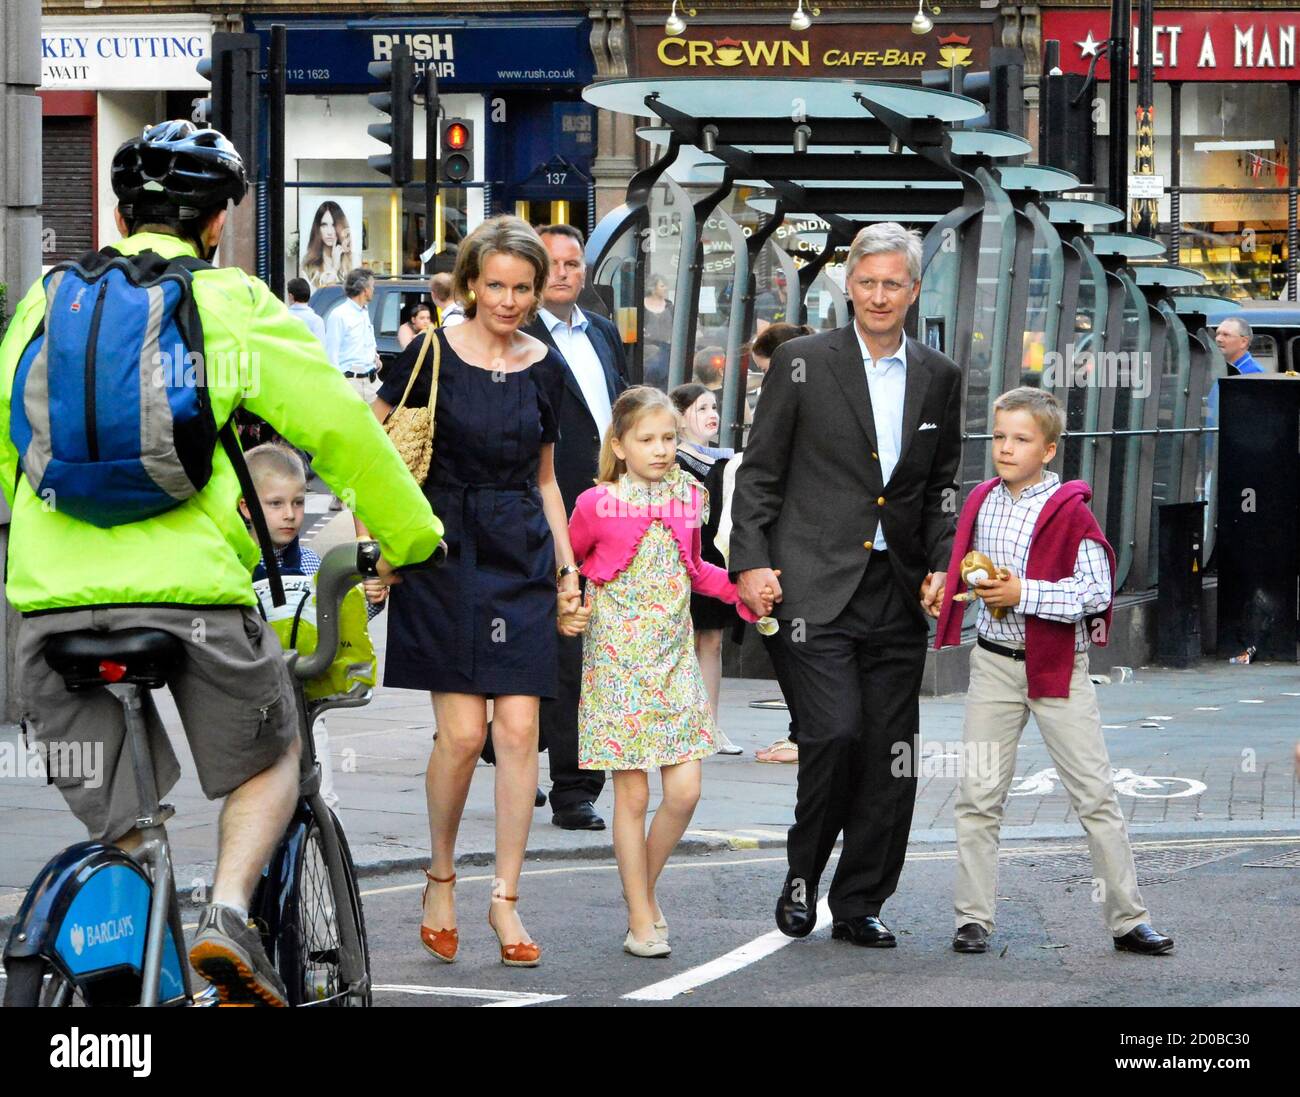 (L-R) Belgium's Prince Emmanuel, Crown Princess Mathilde, Princess Elisabeth, Crown Prince Philippe and Prince Gabriel visit central London ahead of the London 2012 Olympic Games July 26, 2012. Picture taken on July 26, 2012.                REUTERS/Benoit Doppagne/Pool    (BRITAIN  - Tags: SPORT ROYALS POLITICS SPORT OLYMPICS) Stock Photo